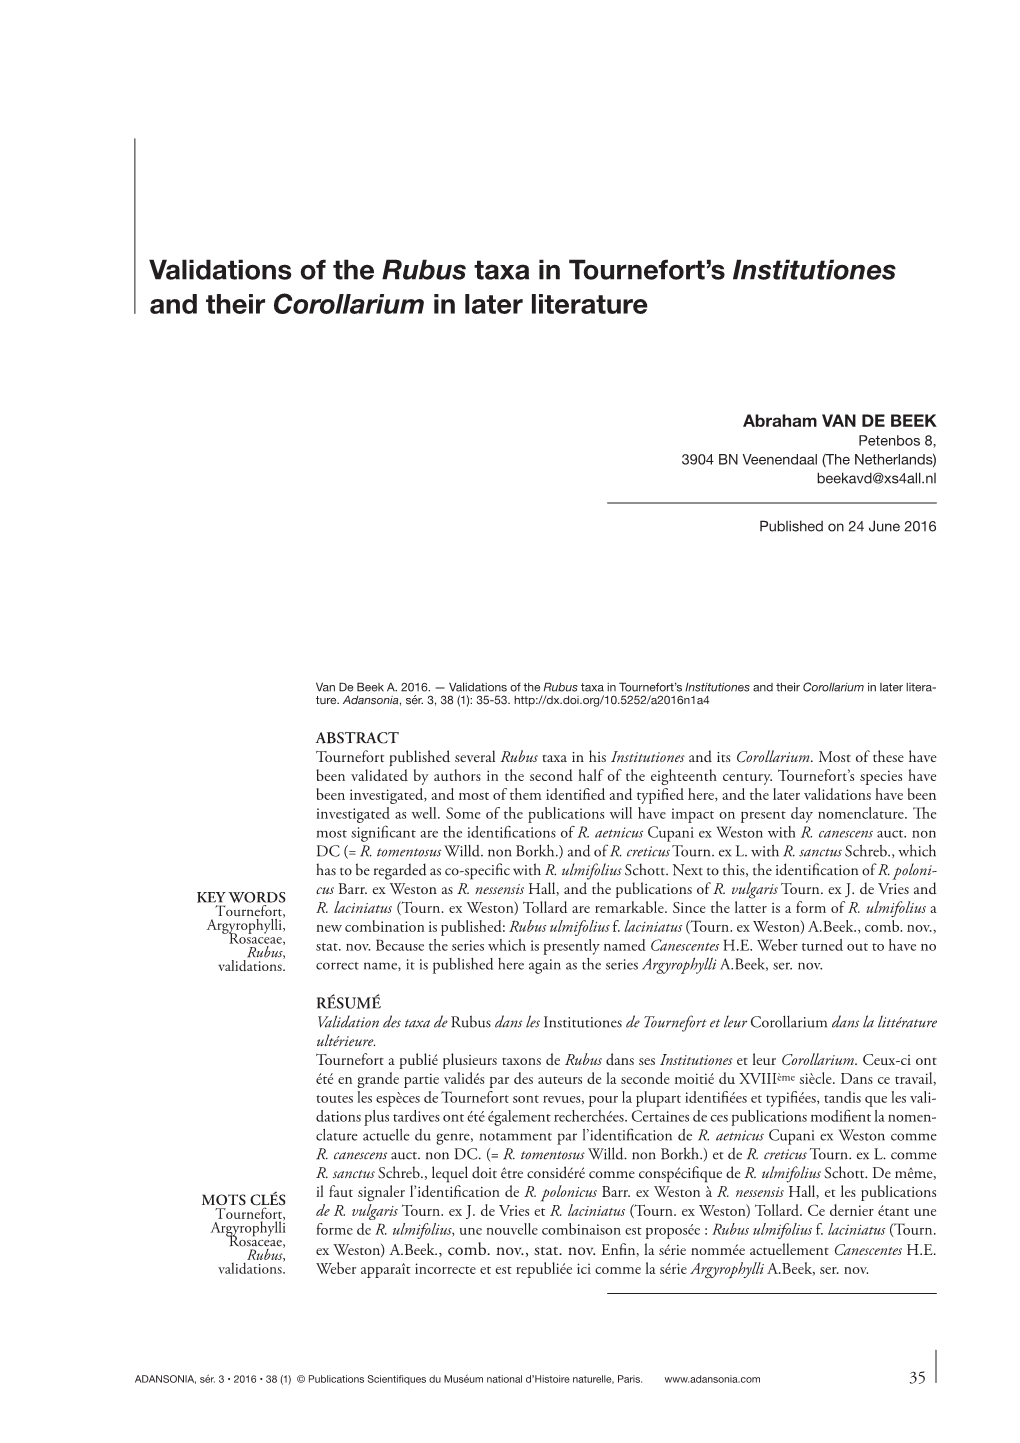 Validations of the Rubus Taxa in Tournefort's Institutiones and Their